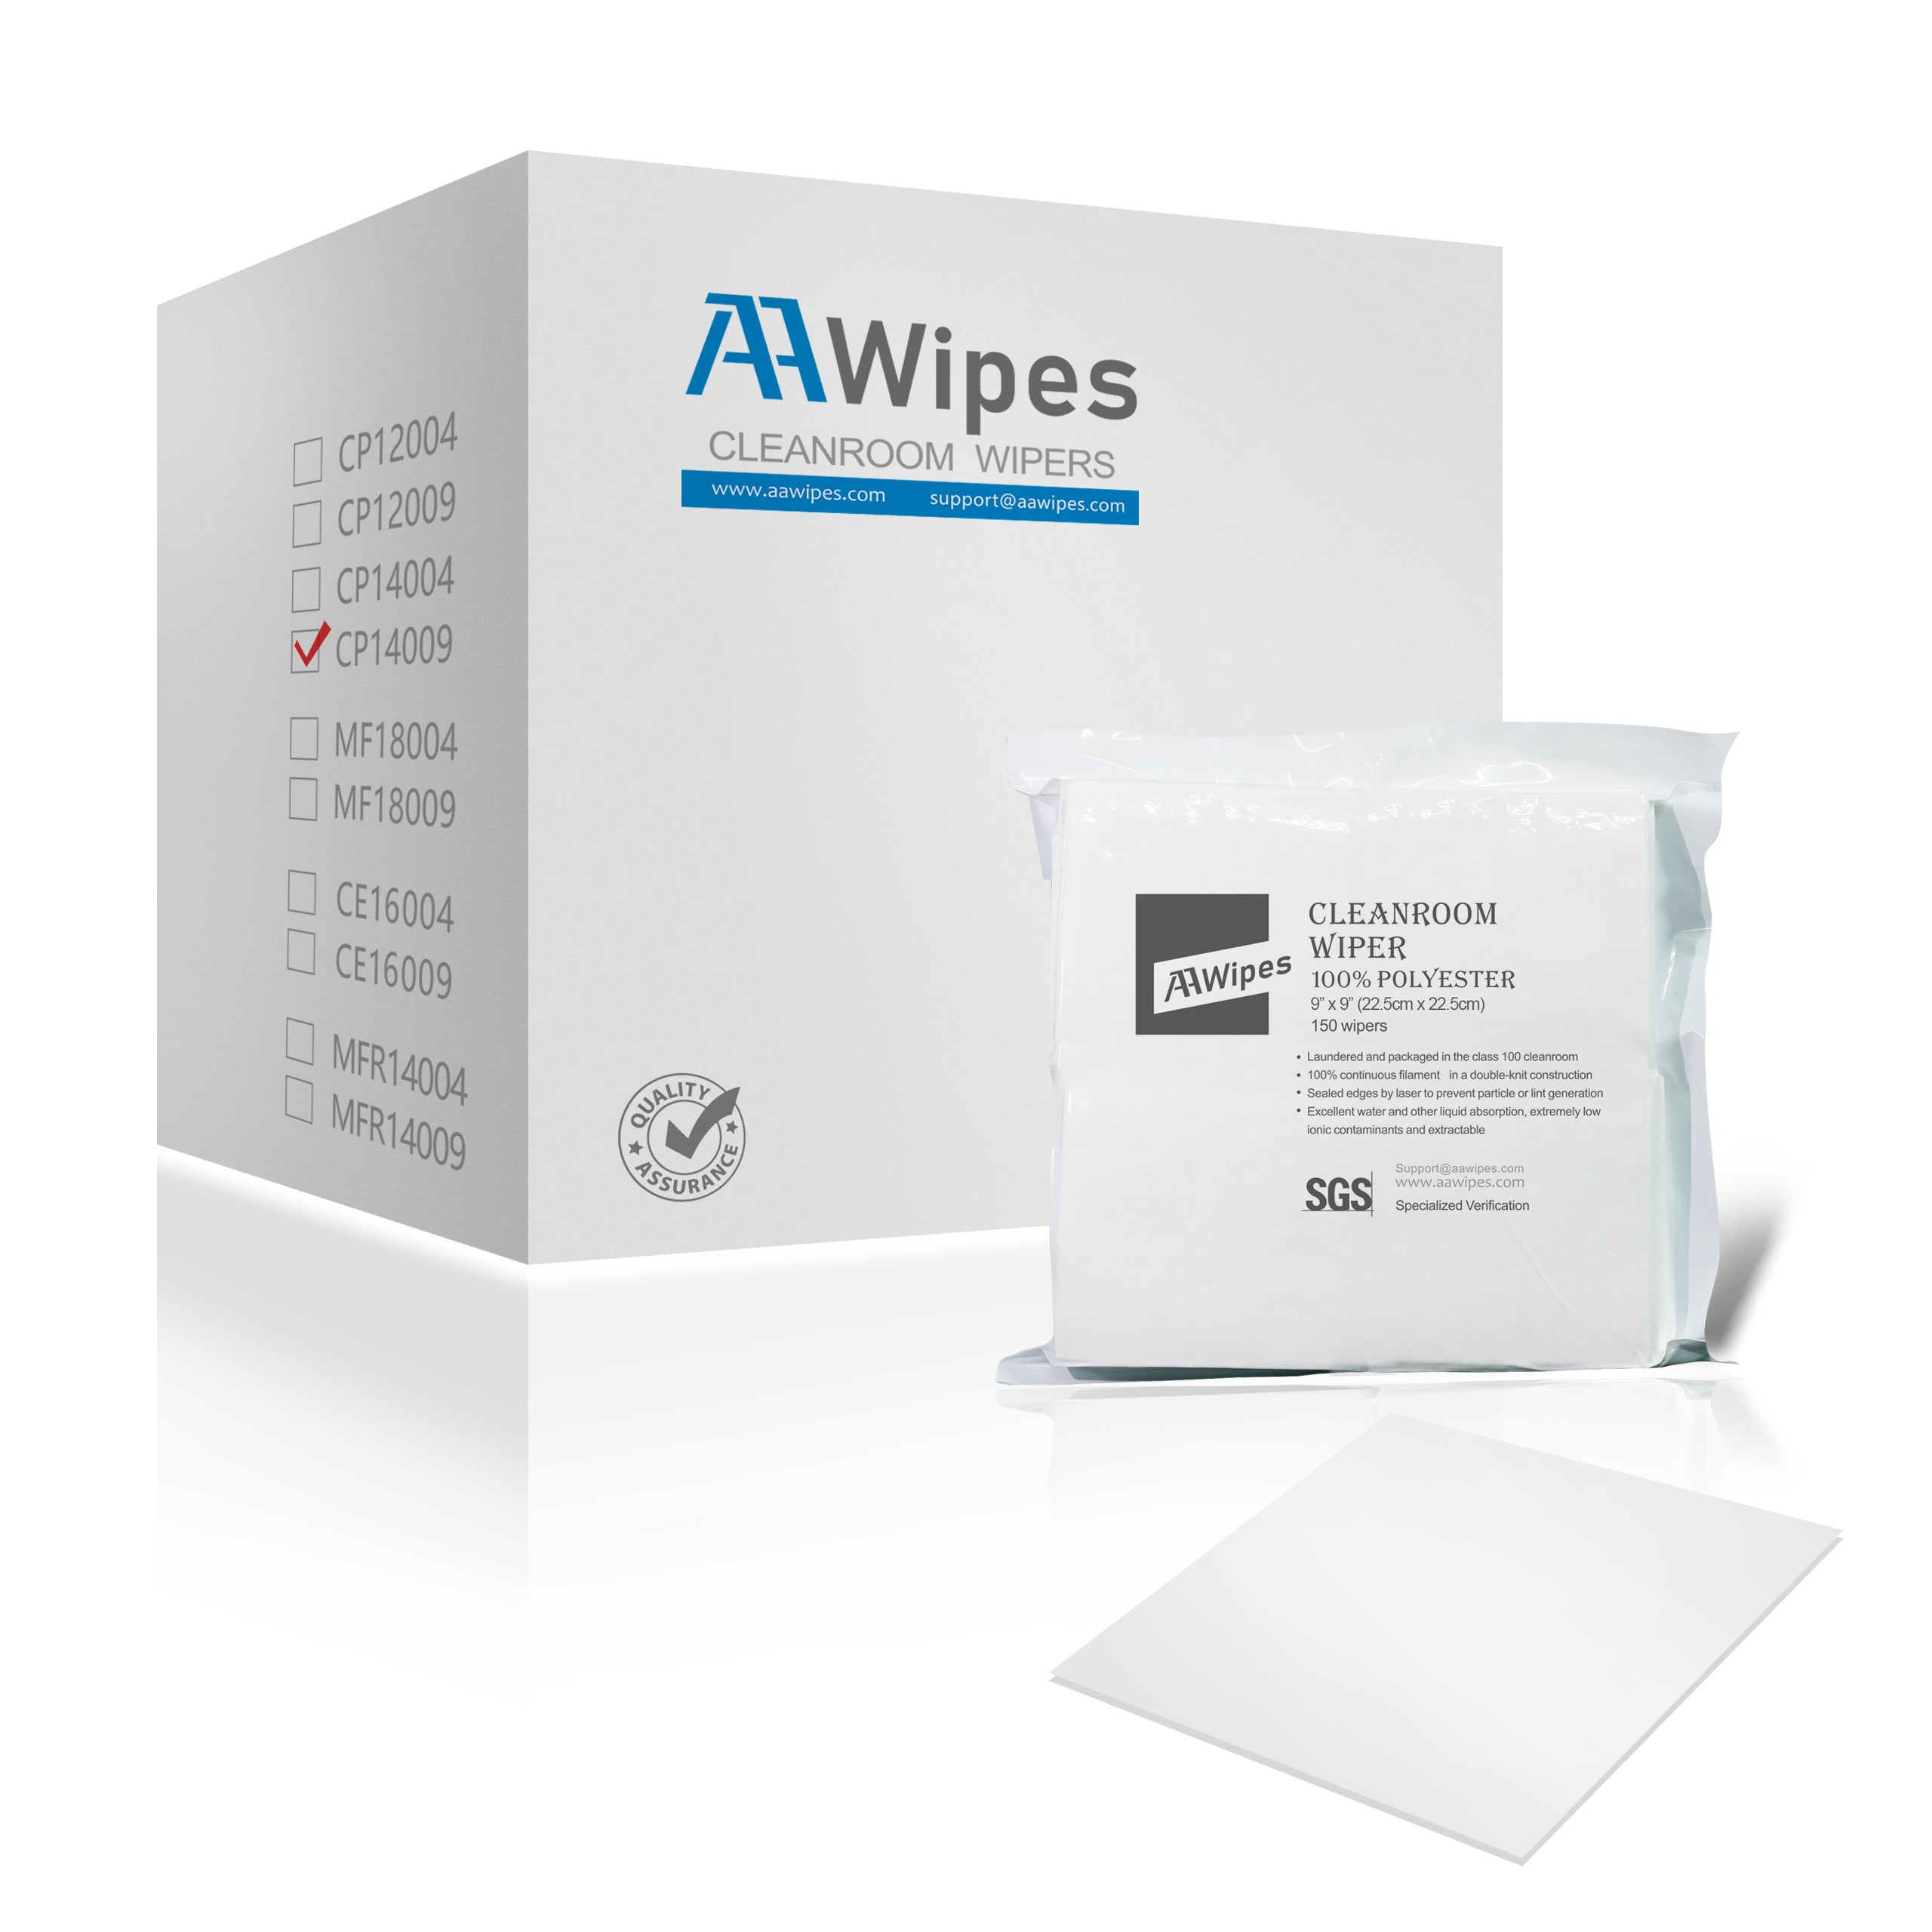 Cleanroom Wipers 9"x9" 100% Polyester Double Knit with Ultra-Fine Filaments for Aerospace and Aviation, Laser Sealed Edge, ISO 4-5, Class 10-100 Cloths, Ultra-Soft Wipes(No. CP14009-140 Bags/10 Boxes for Mac)